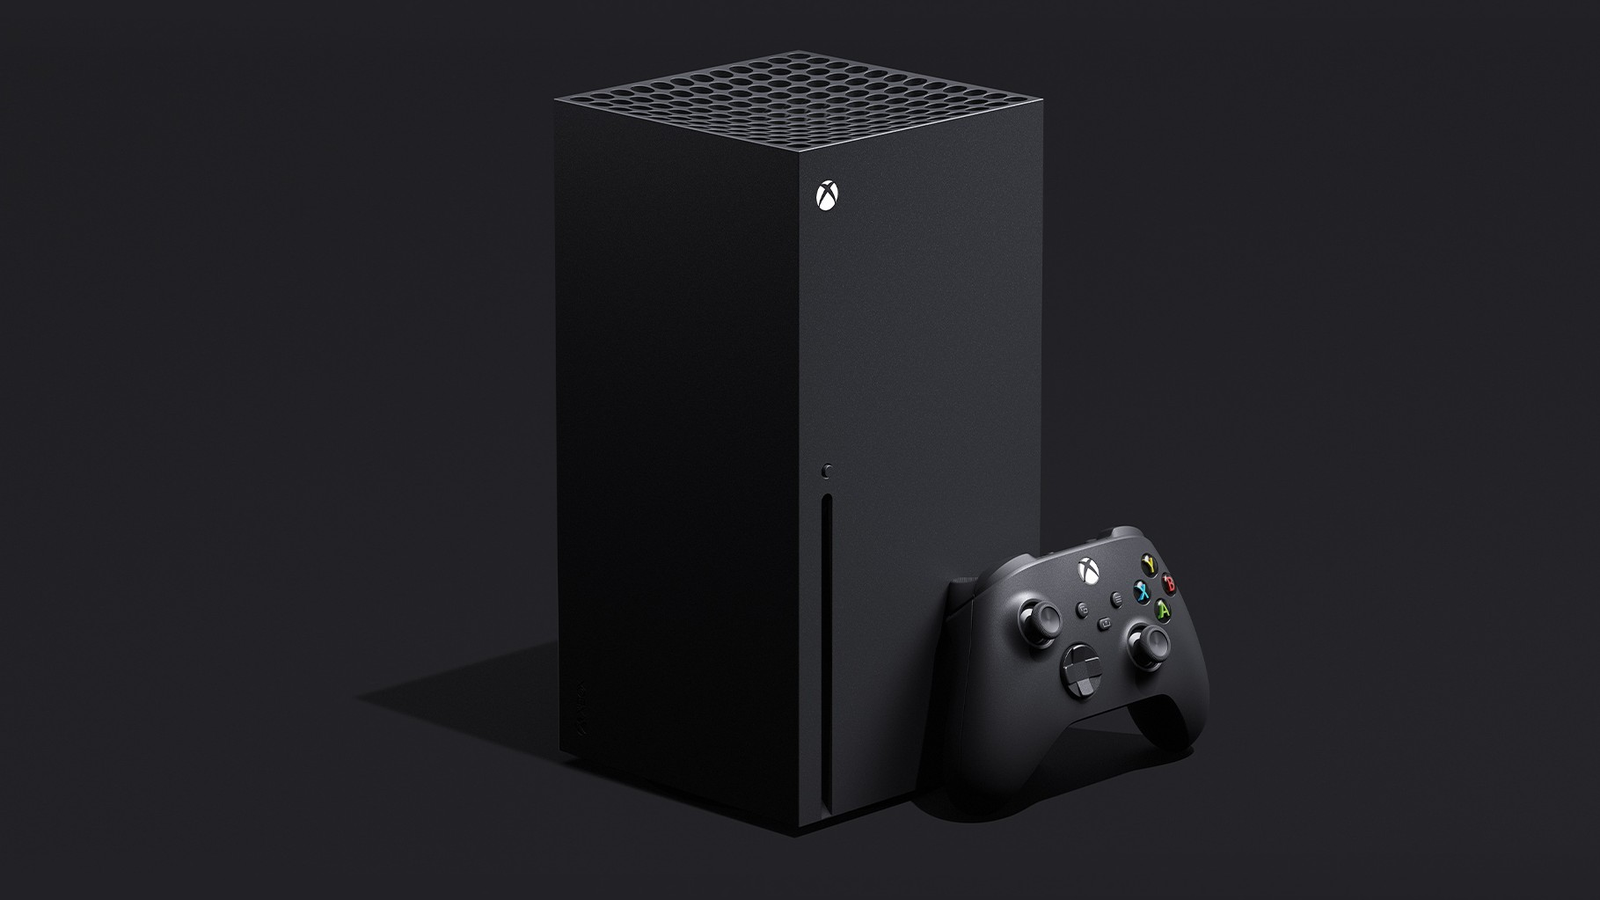 News You Might've Missed on 11/12/20: Microsoft Won't Reveal Xbox Series X  Sales, Half-Life: Alyx Developer Commentary, & More